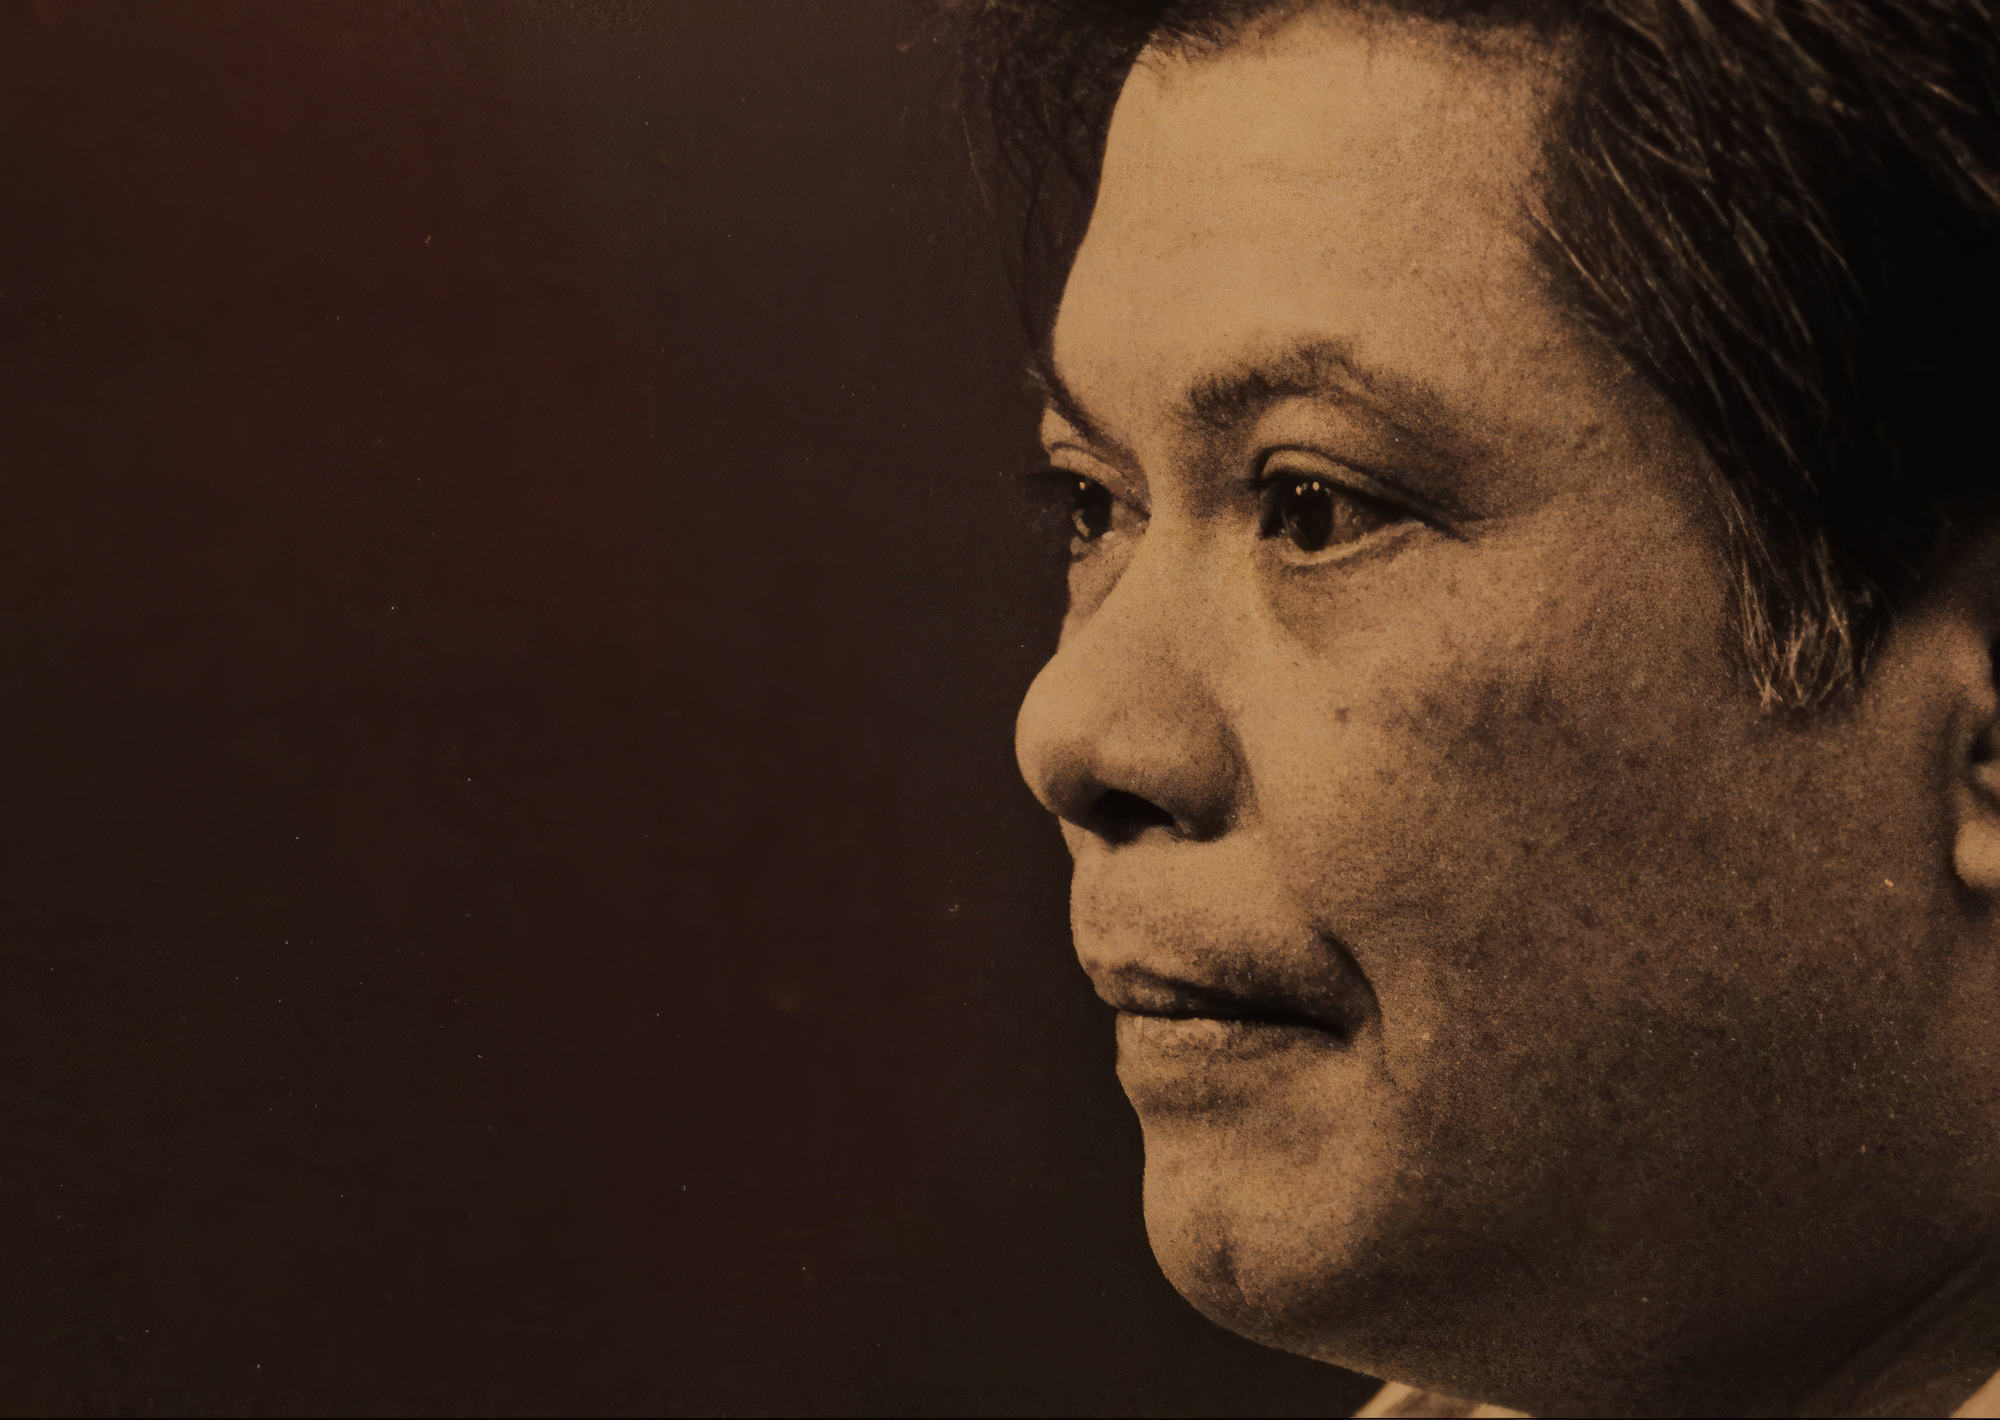 Human Rights Watch Honors a Philippine Human Rights Icon